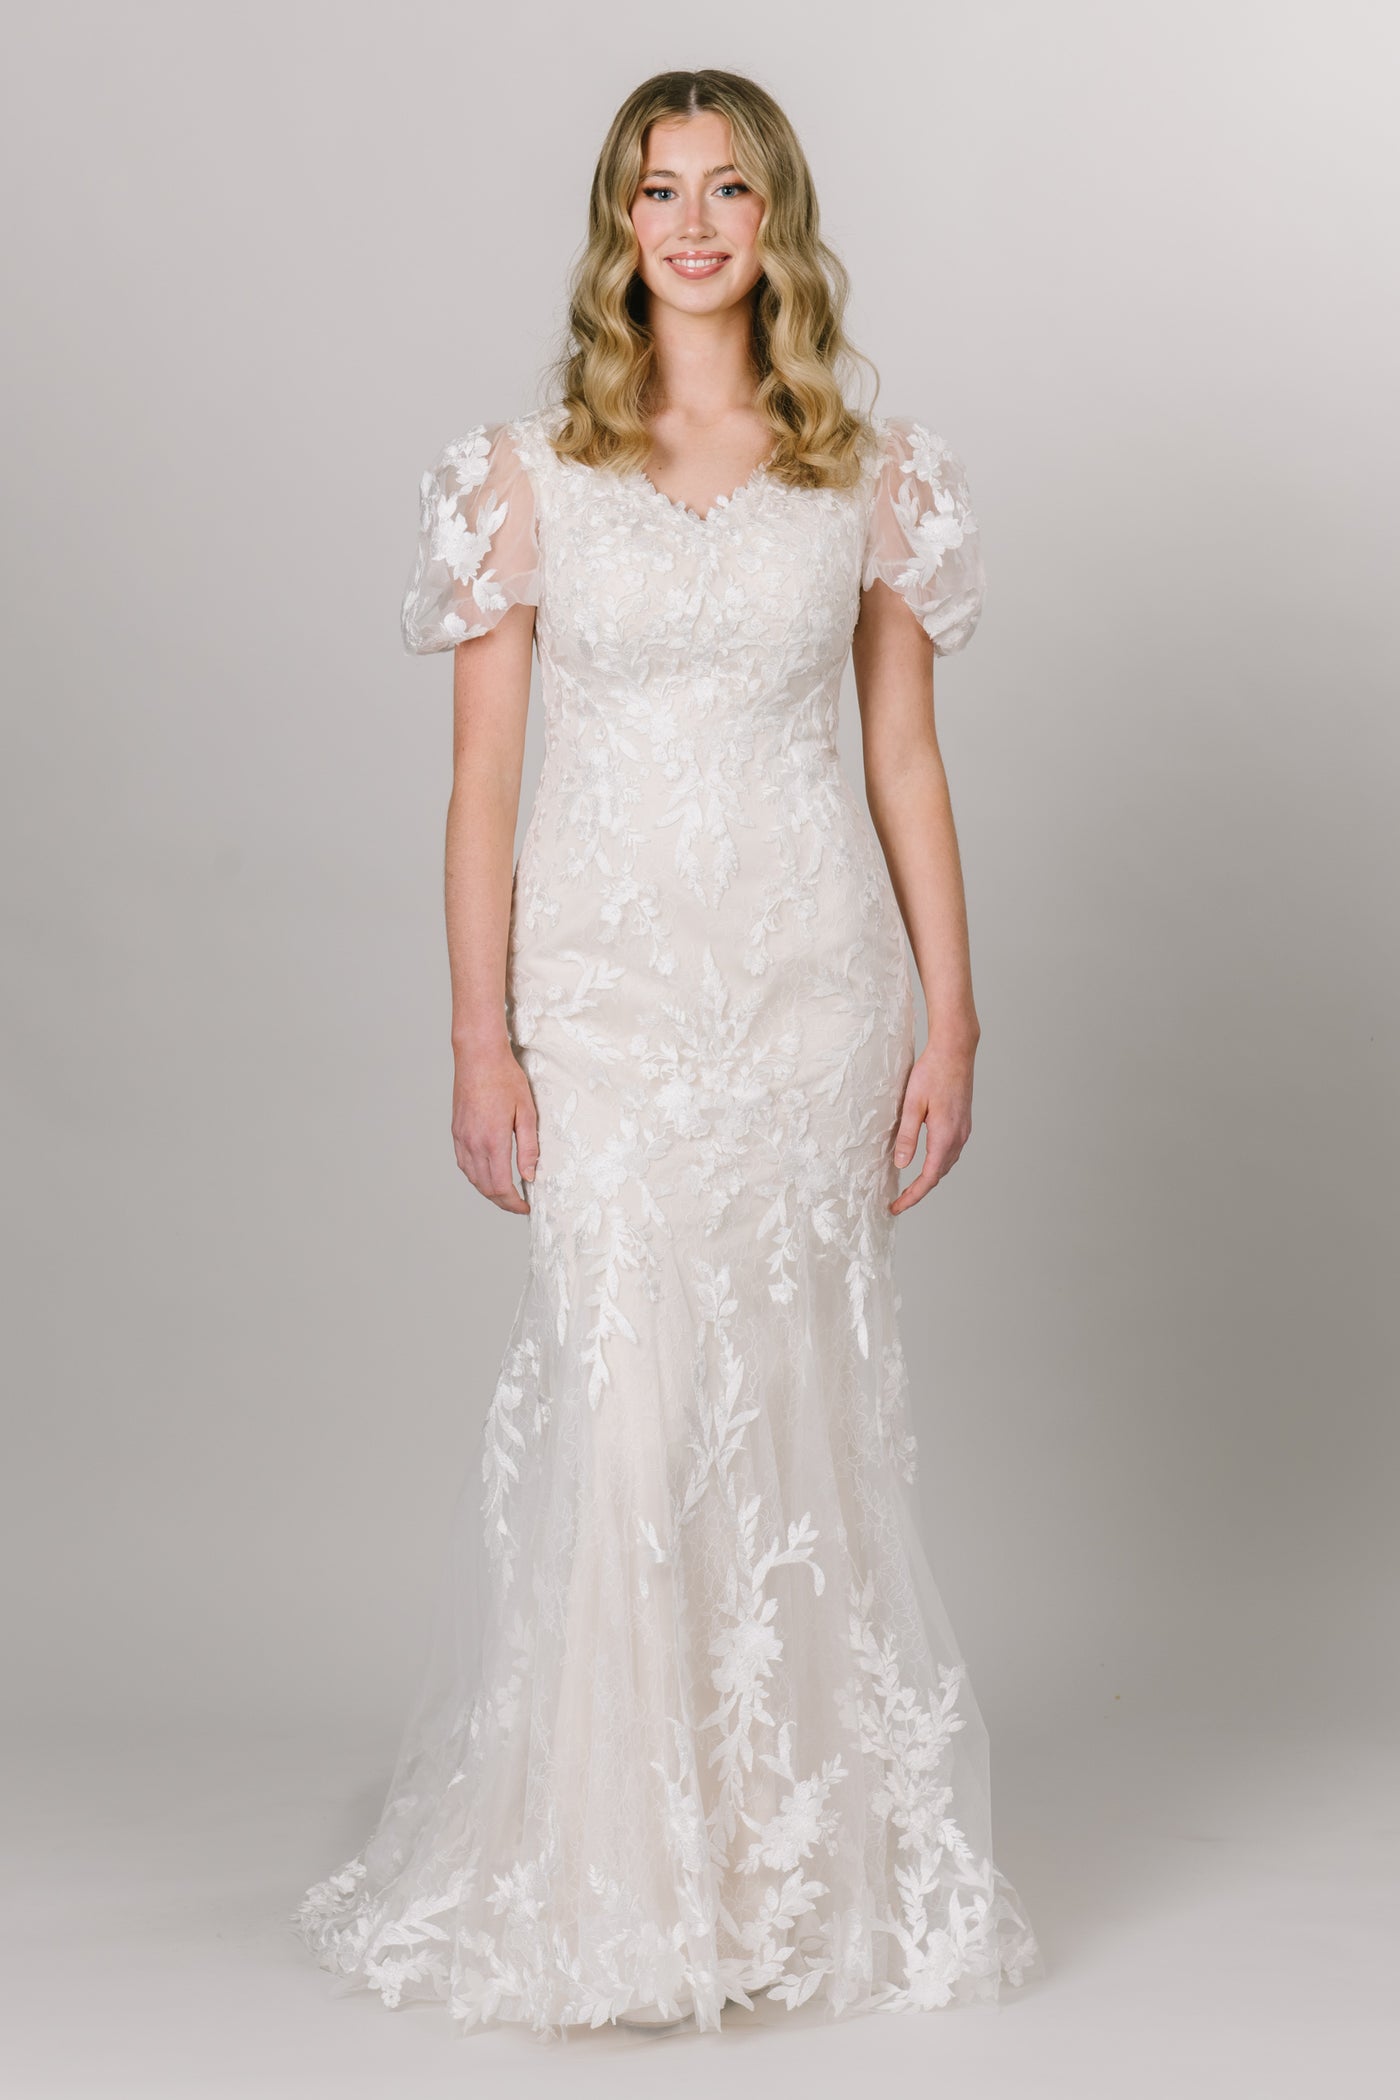 Moments Made Bridal gown with flutter sleeves and v-neckline. It is a fitted dress with a gorgeous long train. It is the perfect modest wedding dress for any season.